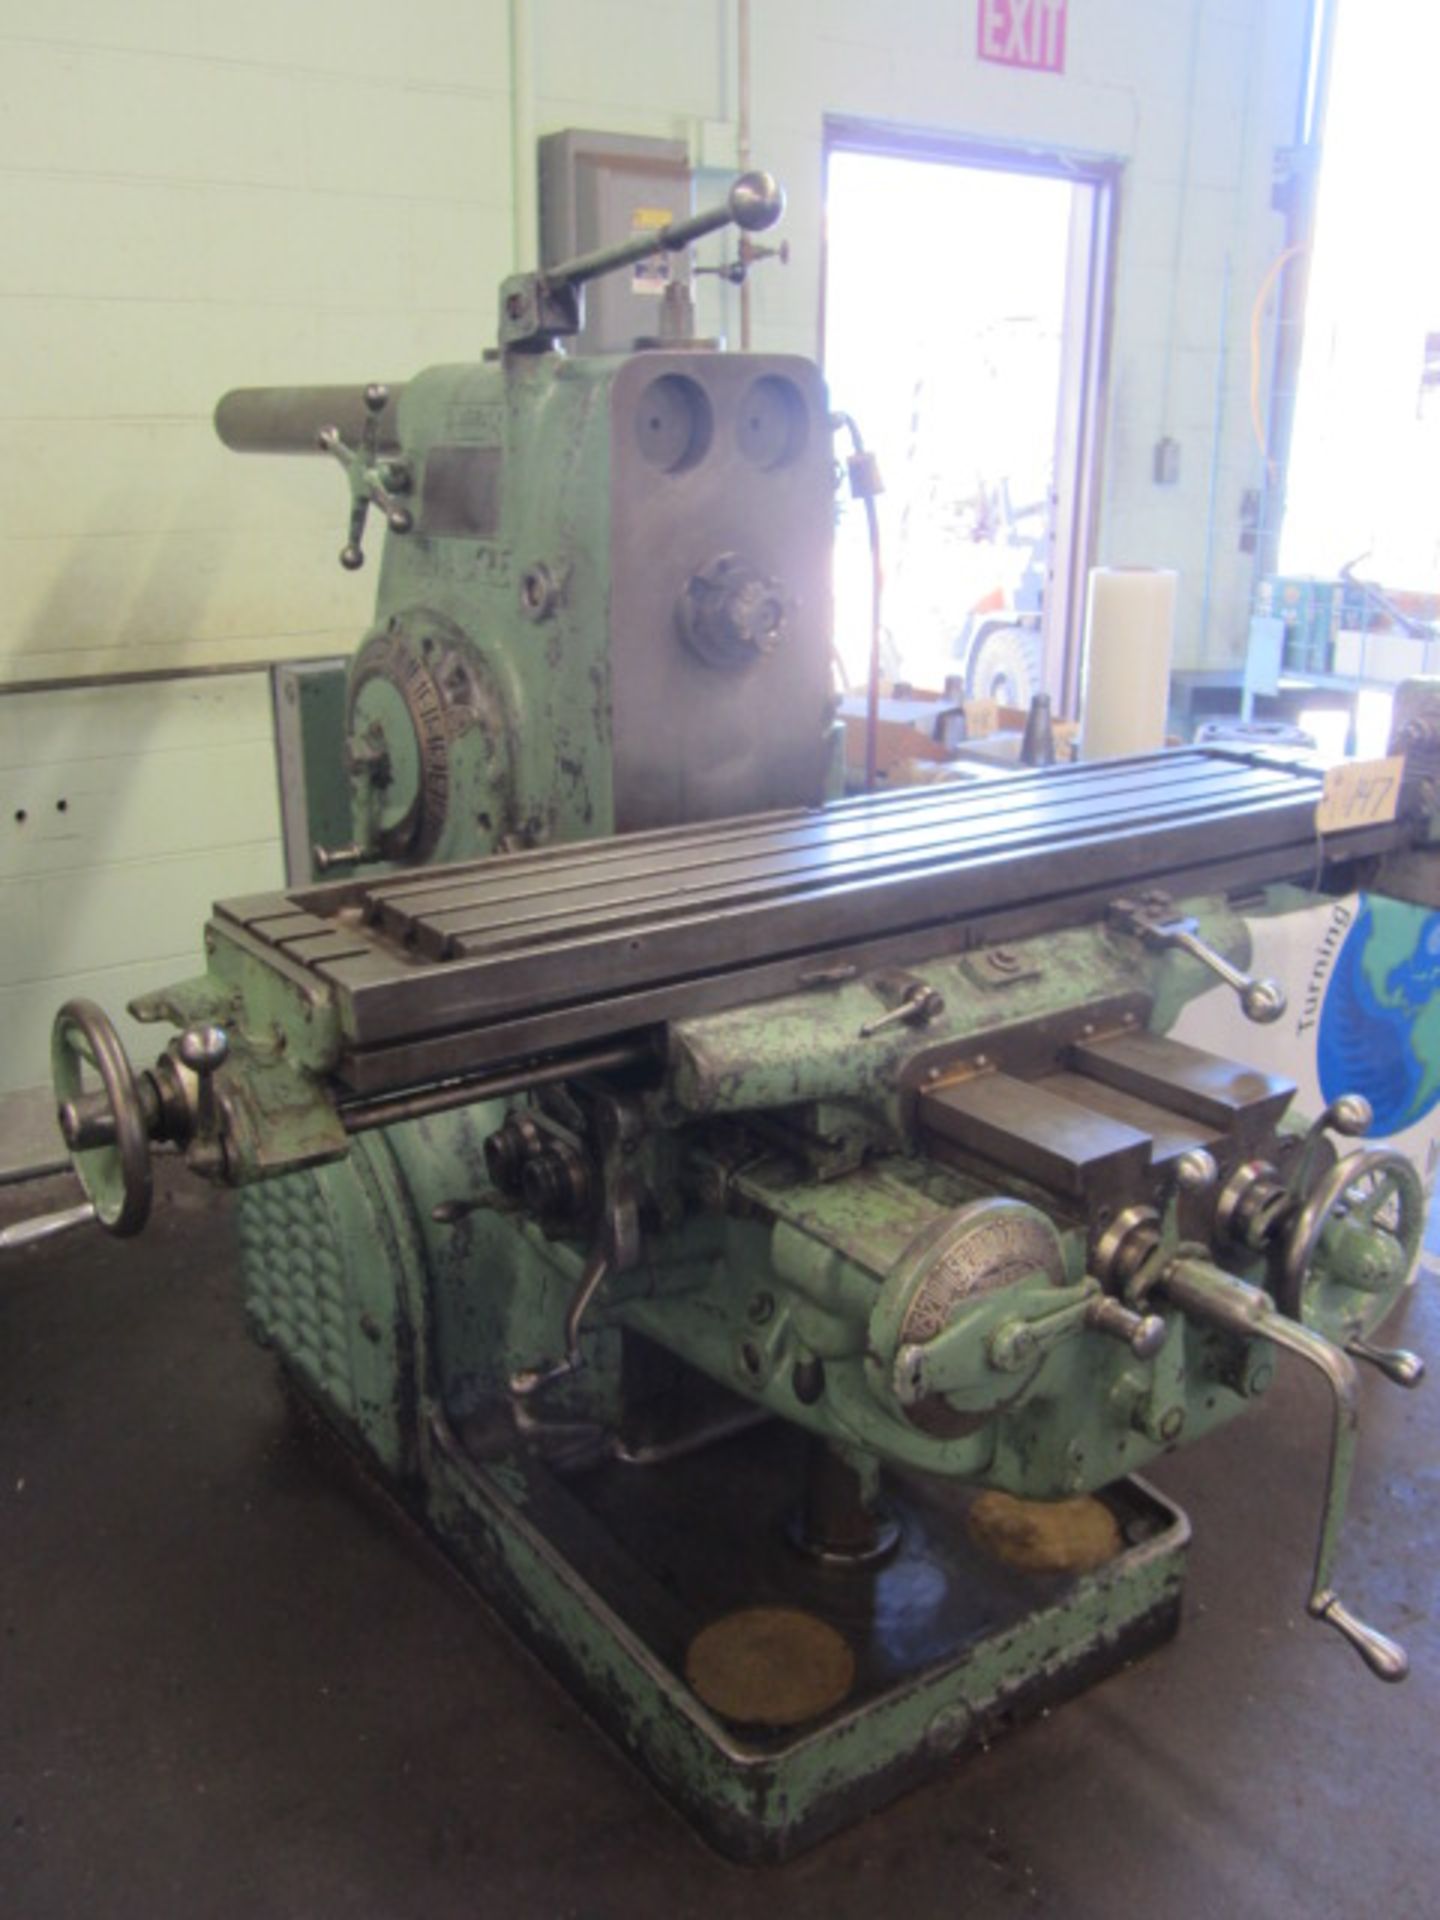 Milwaukee Horizontal Milling Machine with Arbor Support, 12'' x 56'' Work Table, #50 Taper Spindle - Image 6 of 6